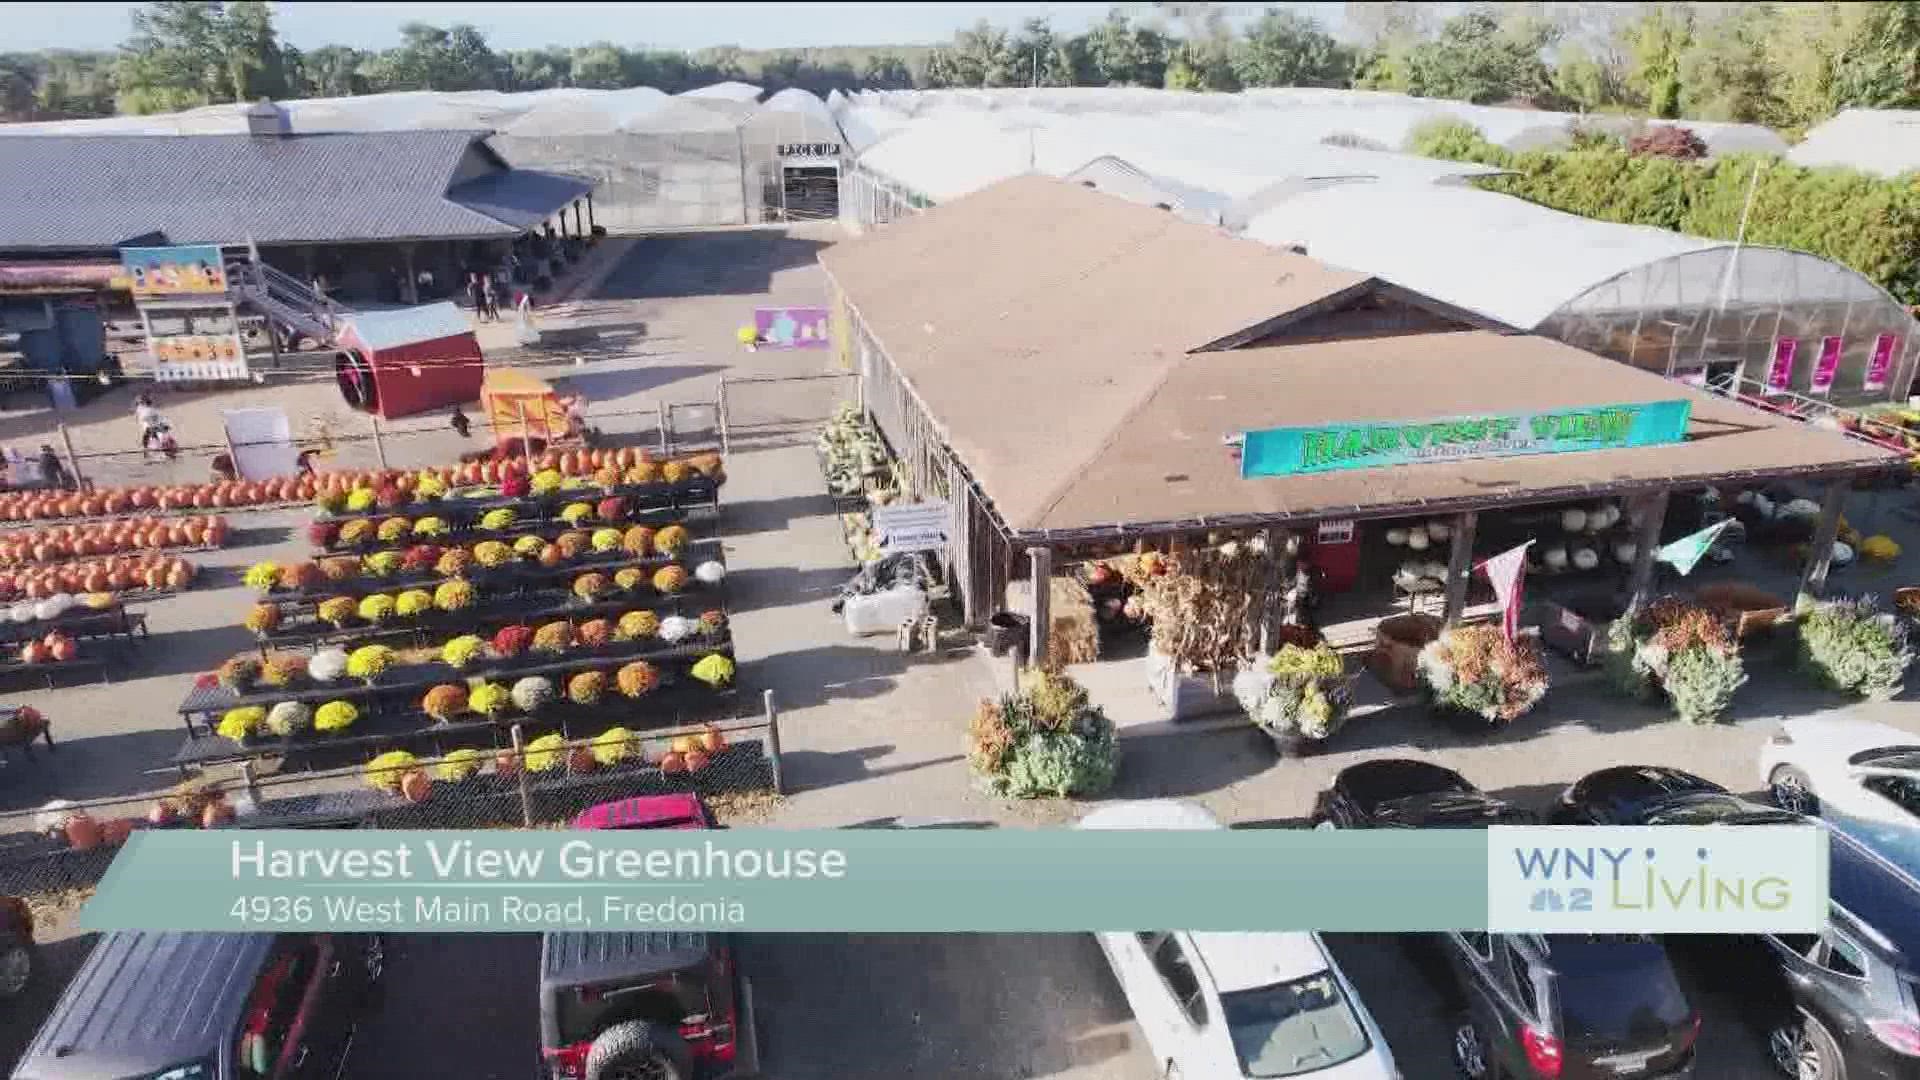 WNY Living - October 1 - Harvest View Greenhouse (THIS VIDEO IS SPONSORED BY HARVEST VIEW GREENHOUSE)